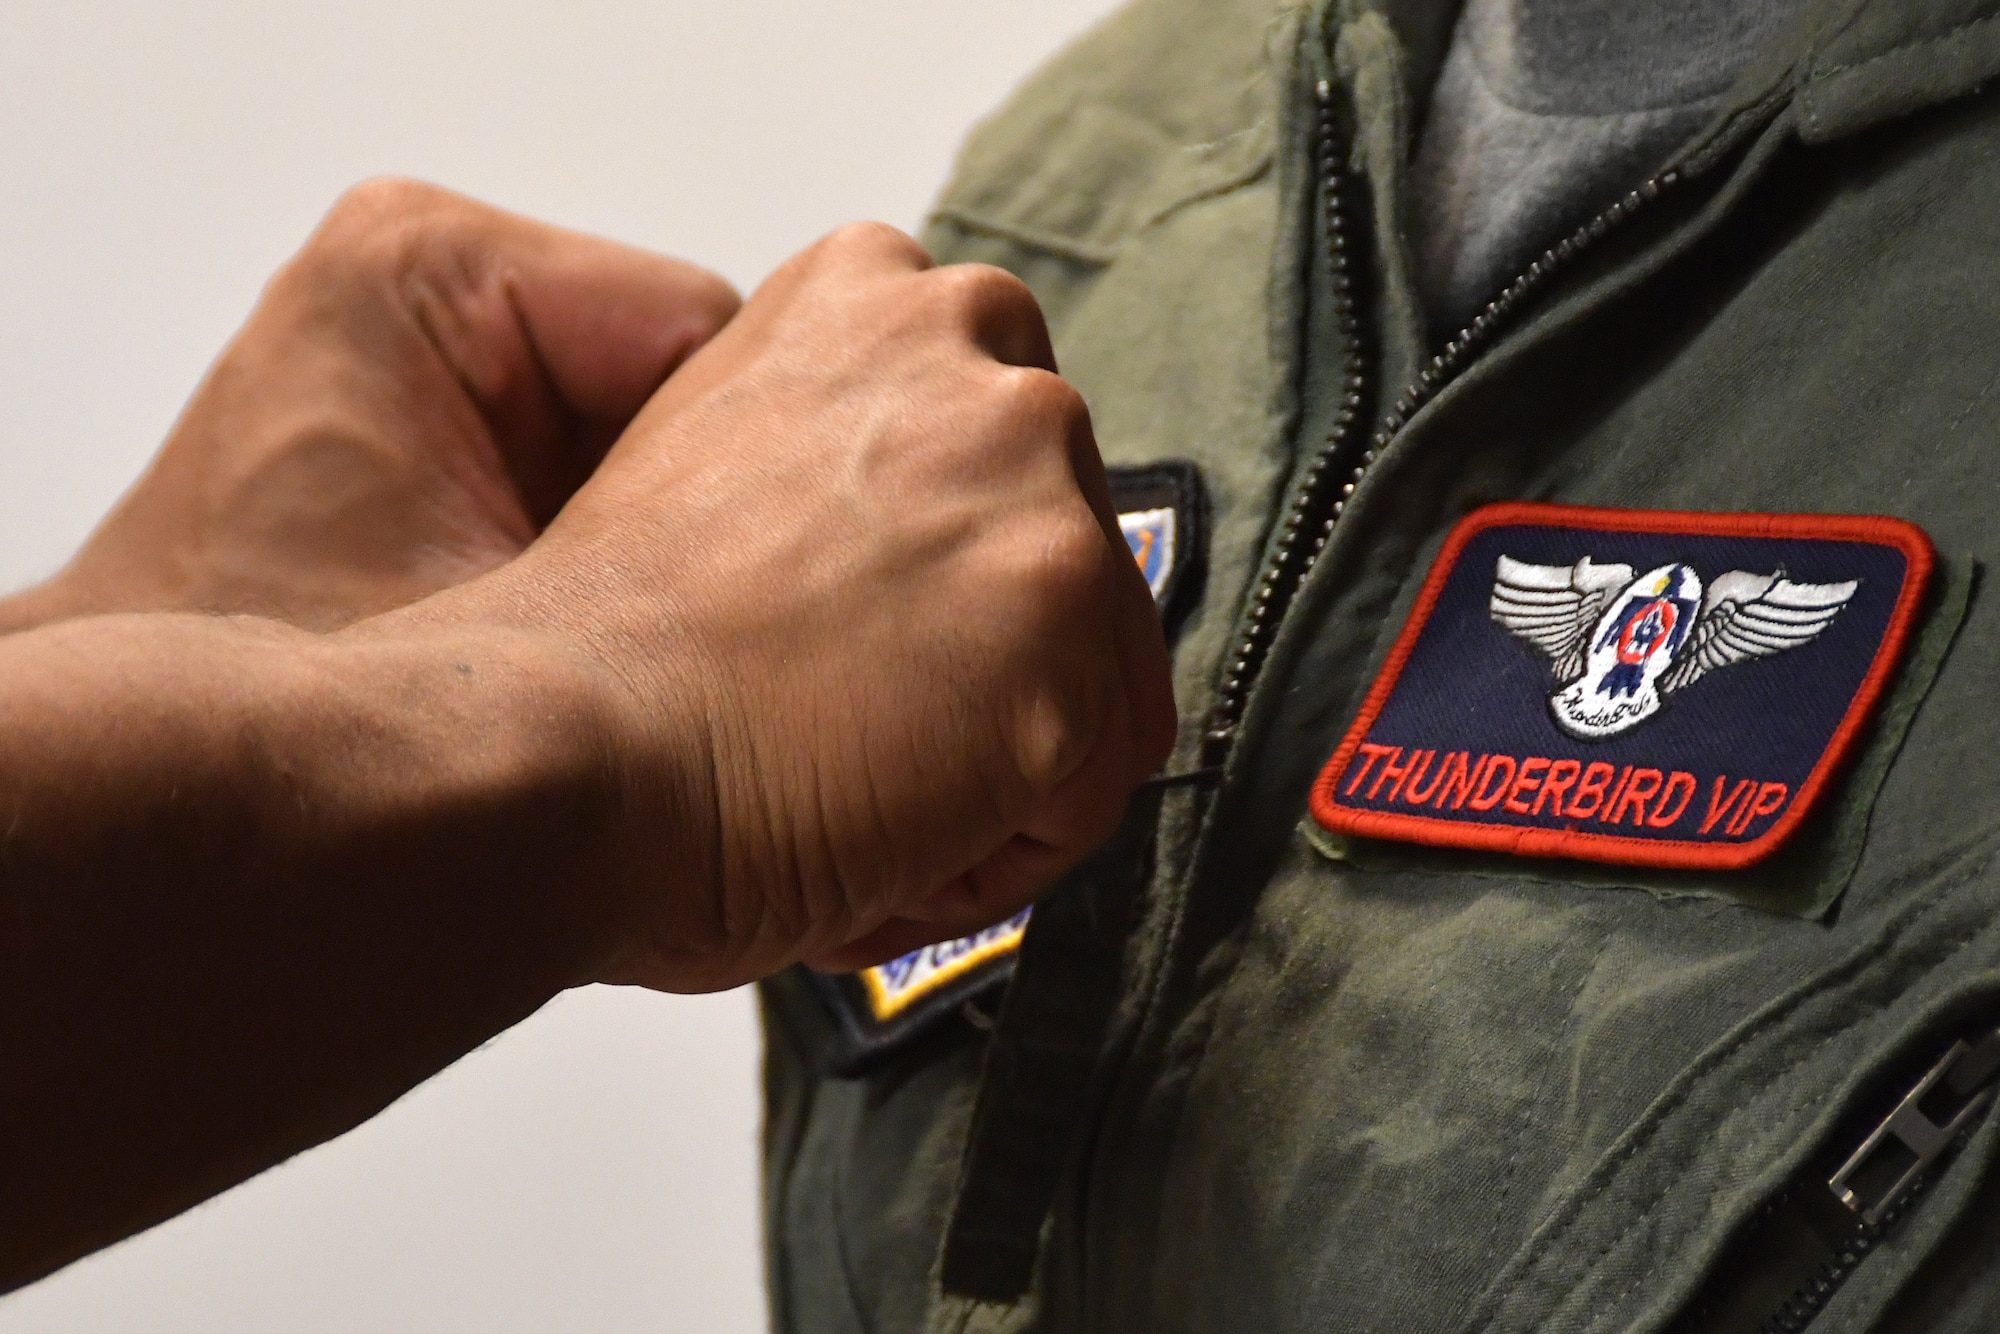 An Airman puts a patch on the flight suit of Tracey Pendley, an Atlanta Public Schools fourth grade teacher, at Dobbins Air Reserve Base, Ga. on Oct. 11, 2019. In addition to being named Georgia’s Teacher of the Year, Tracey was also nominated as a Hometown Hero, a program which allows exceptional community members to be nominated for a familiarization flight in a Thunderbirds jet, an F-16 Fighting Falcon. (U.S. Air Force photo/Airman Kendra A. Ransum)